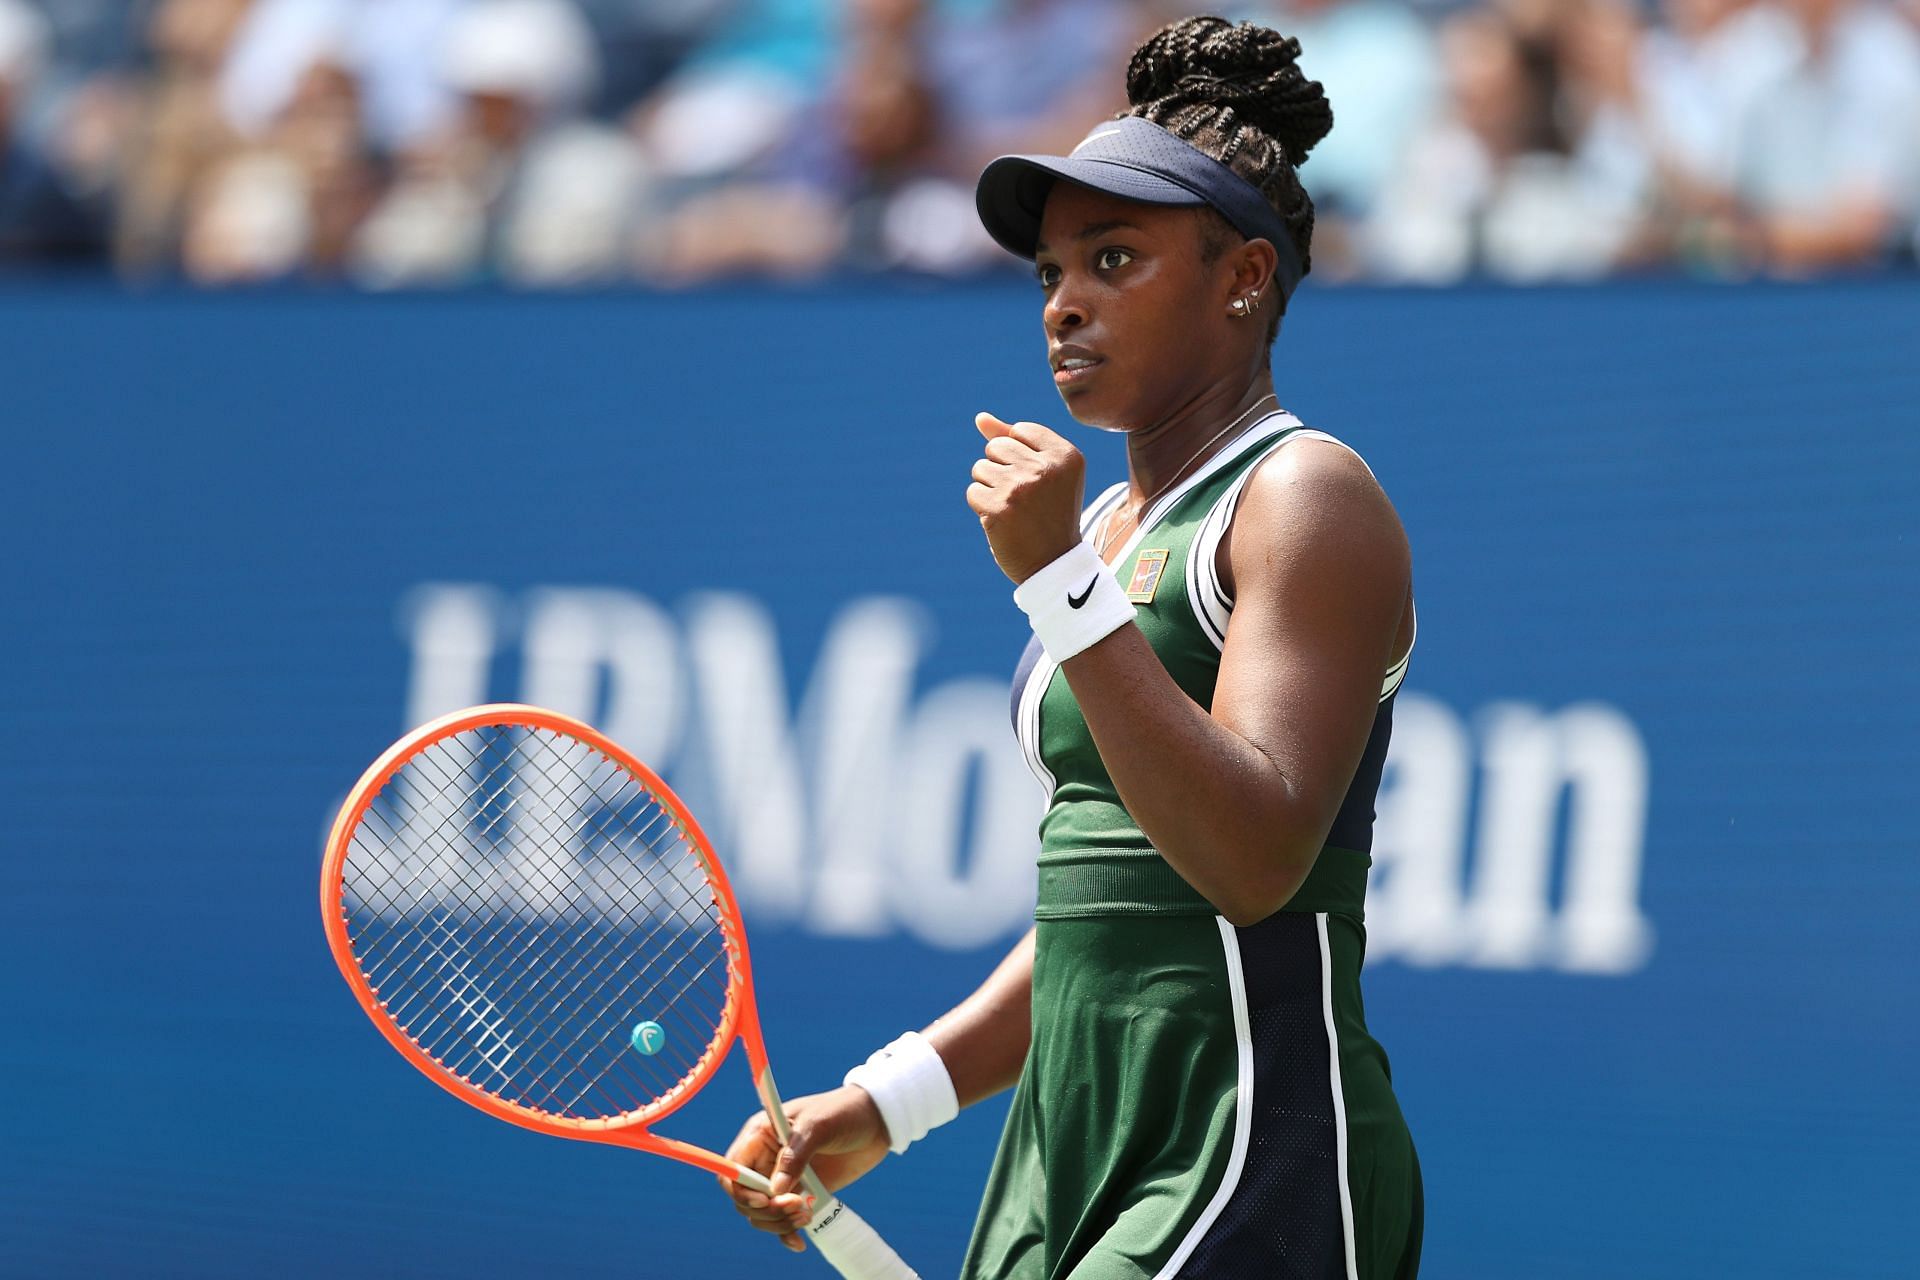 Stephens at the 2021 US Open